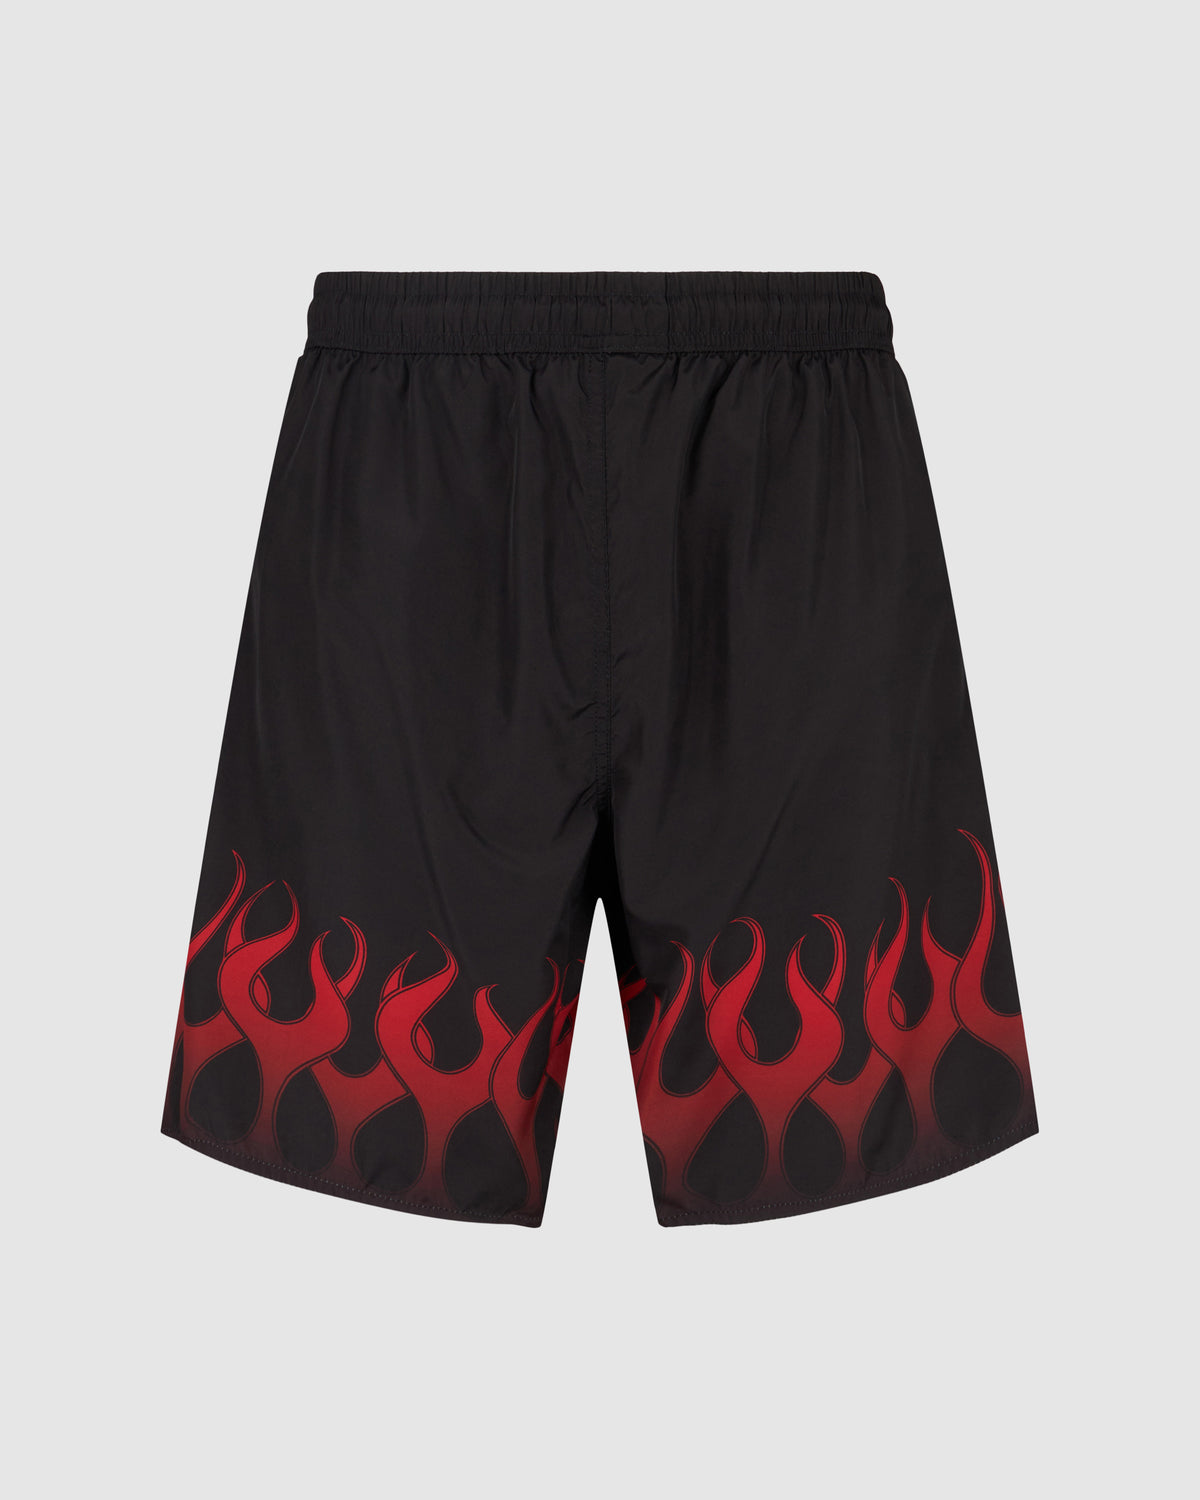 VISION OF SUPER BLACK SWIMWEAR WITH RED FLAMES